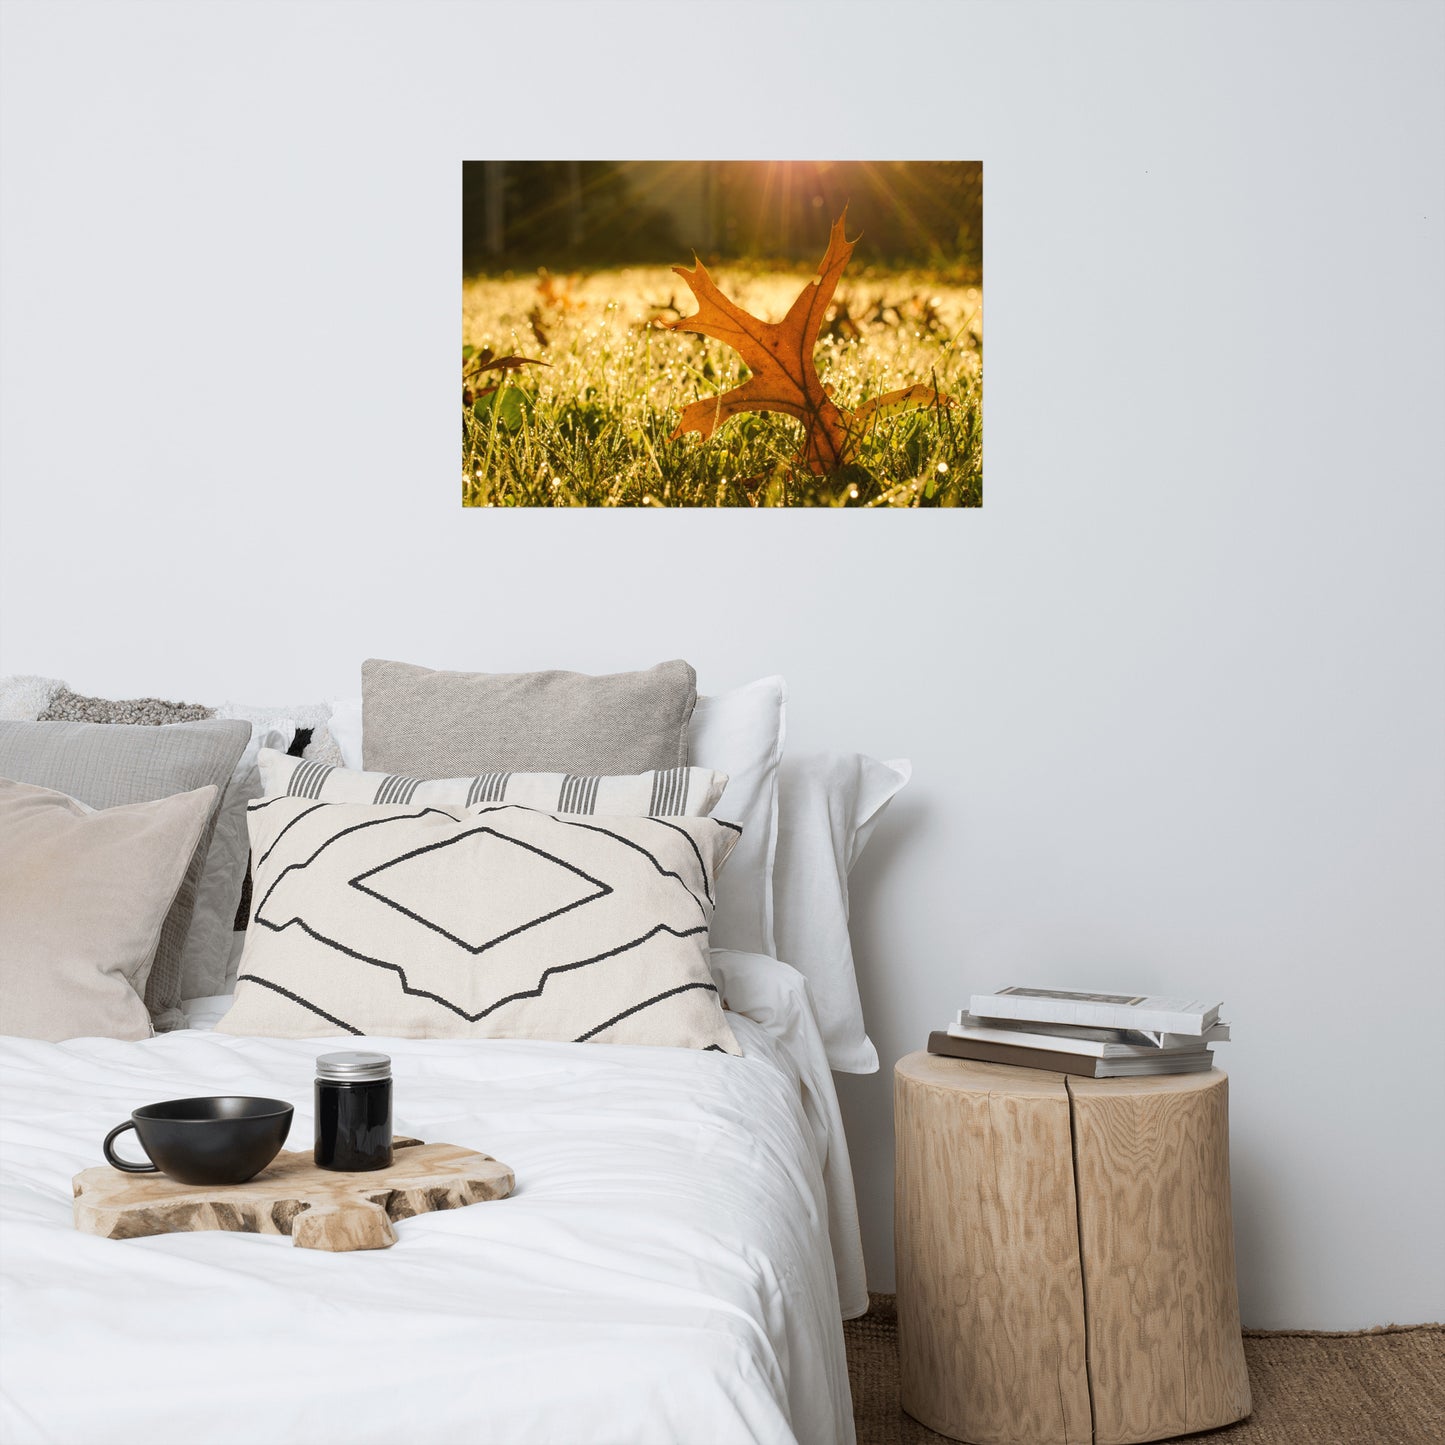 Fall Leaf in Morning Sun Botanical Nature Photo Loose Unframed Wall Art Prints